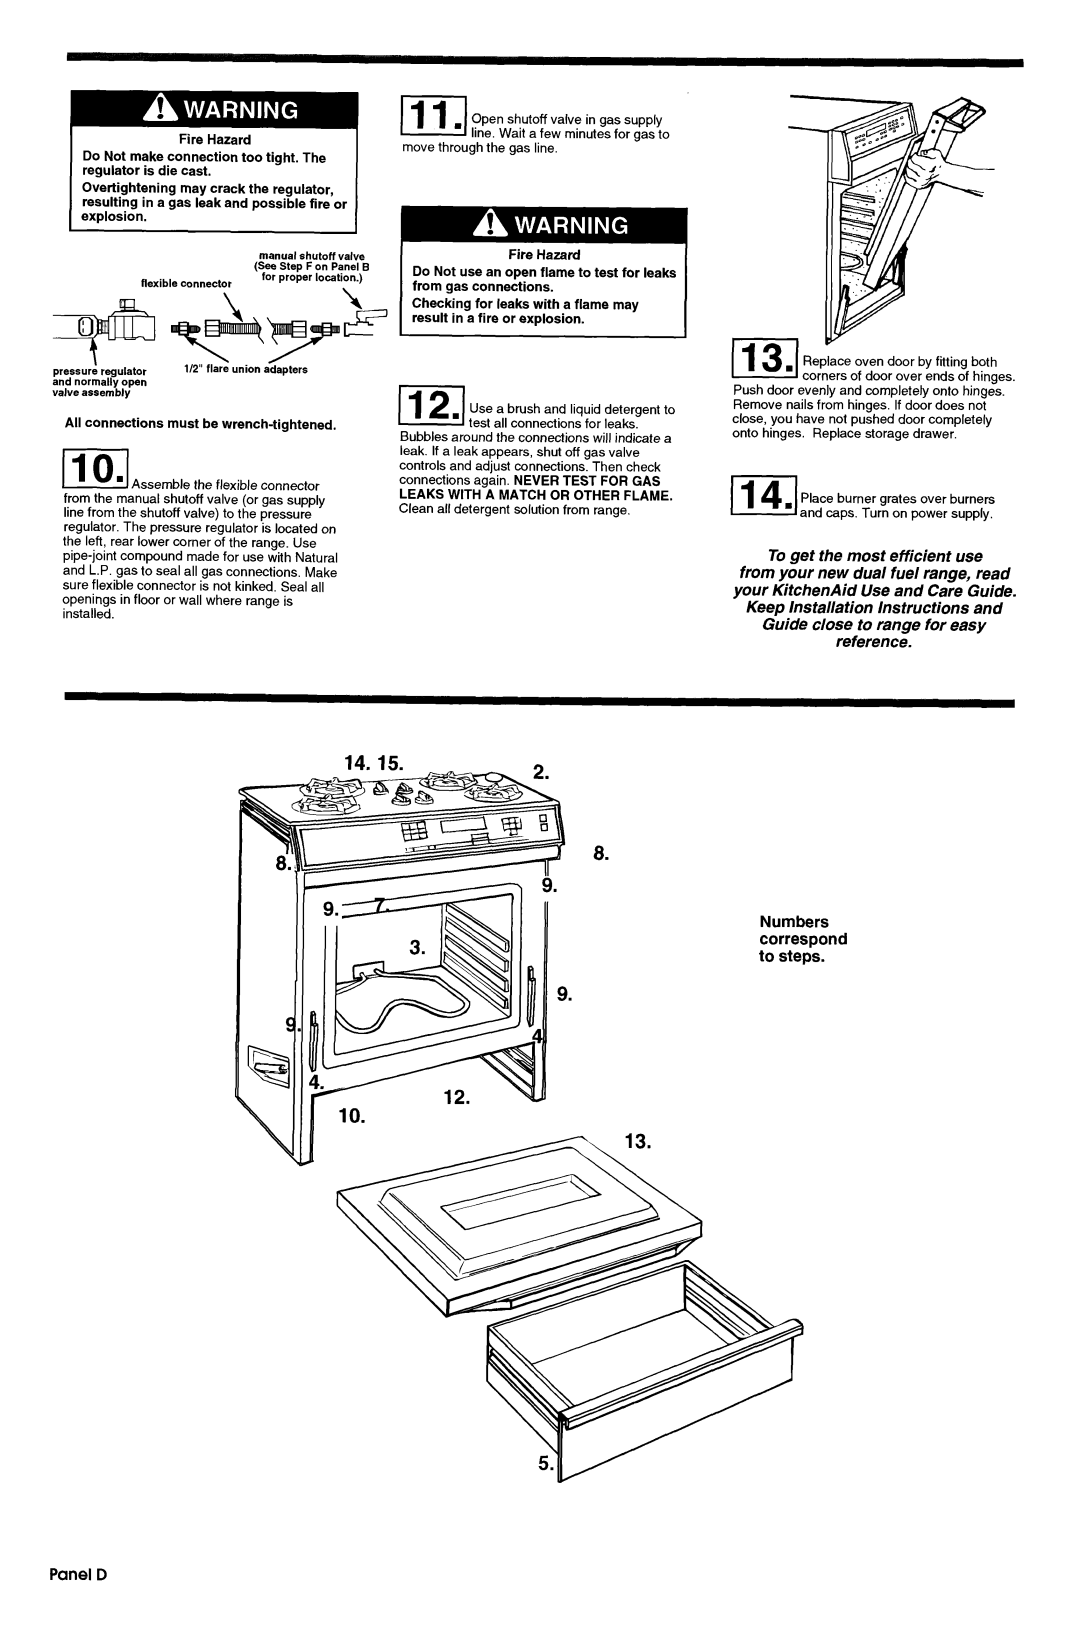 KitchenAid 3186508 Keep Installation instructions and, Guide close to range for easy reference, Panel D 